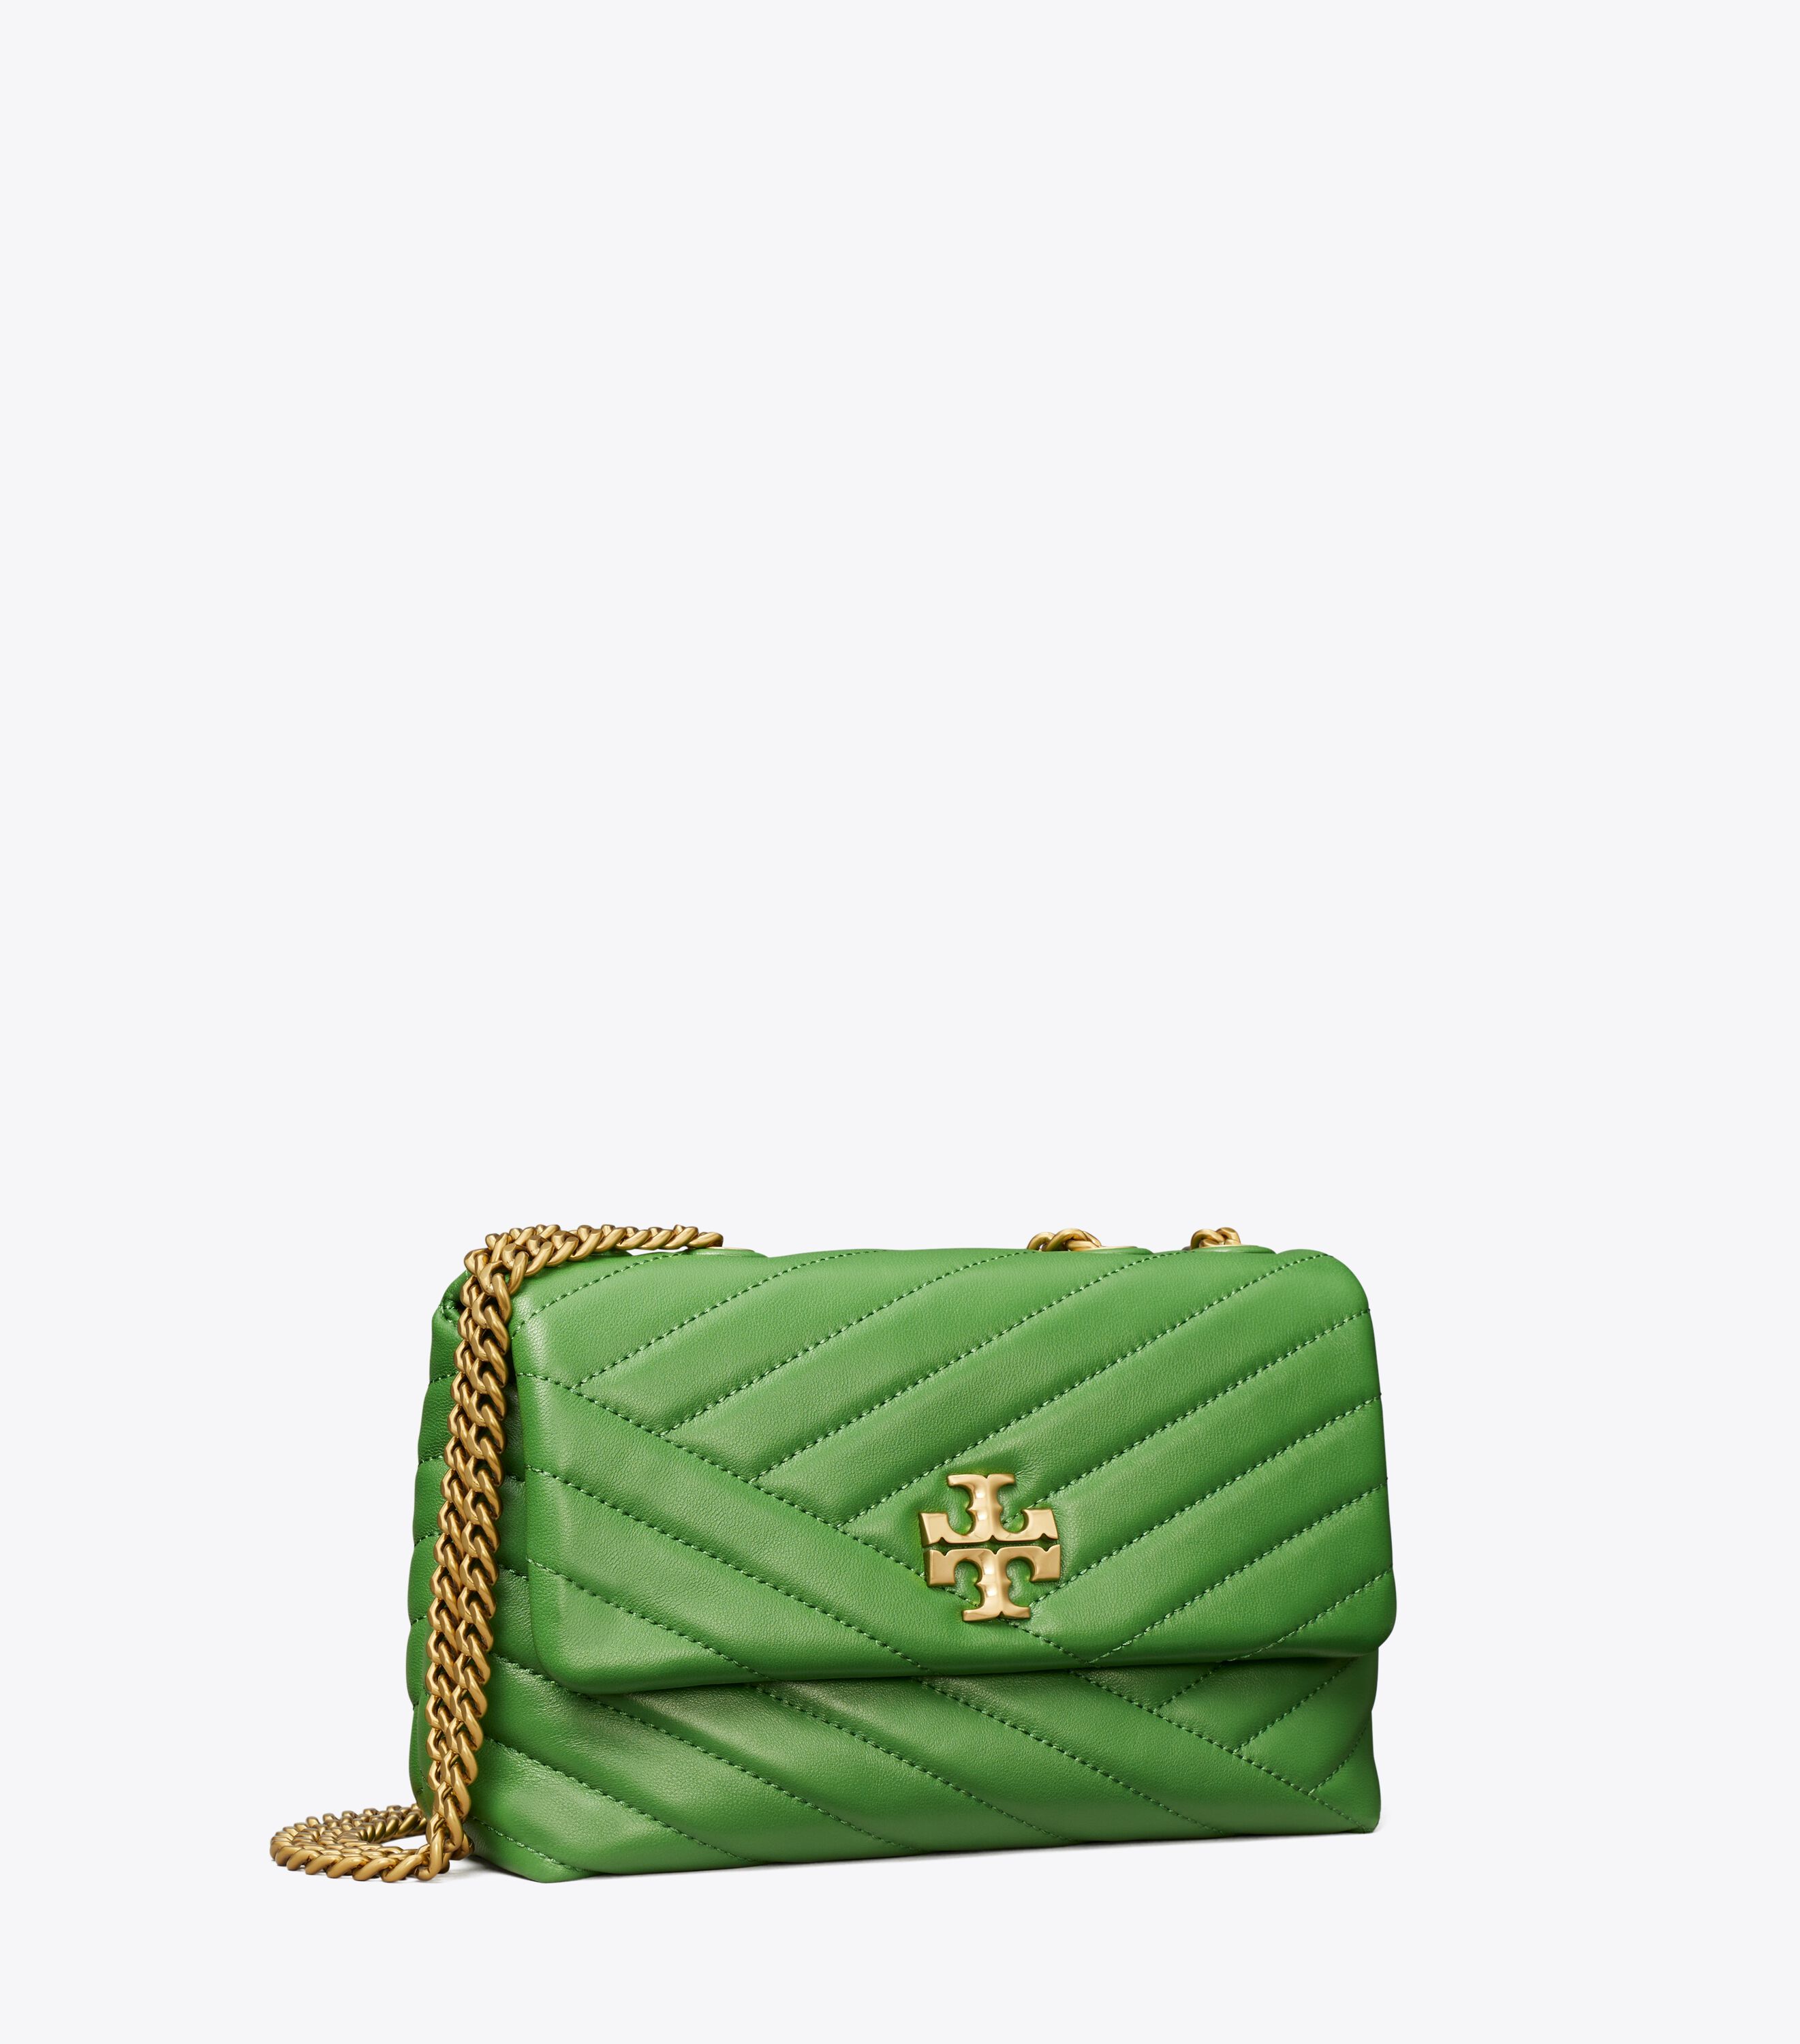 Tory Burch Britten Convertible Crossbody Bag With Gold Hardware, Black :  Amazon.ca: Clothing, Shoes & Accessories